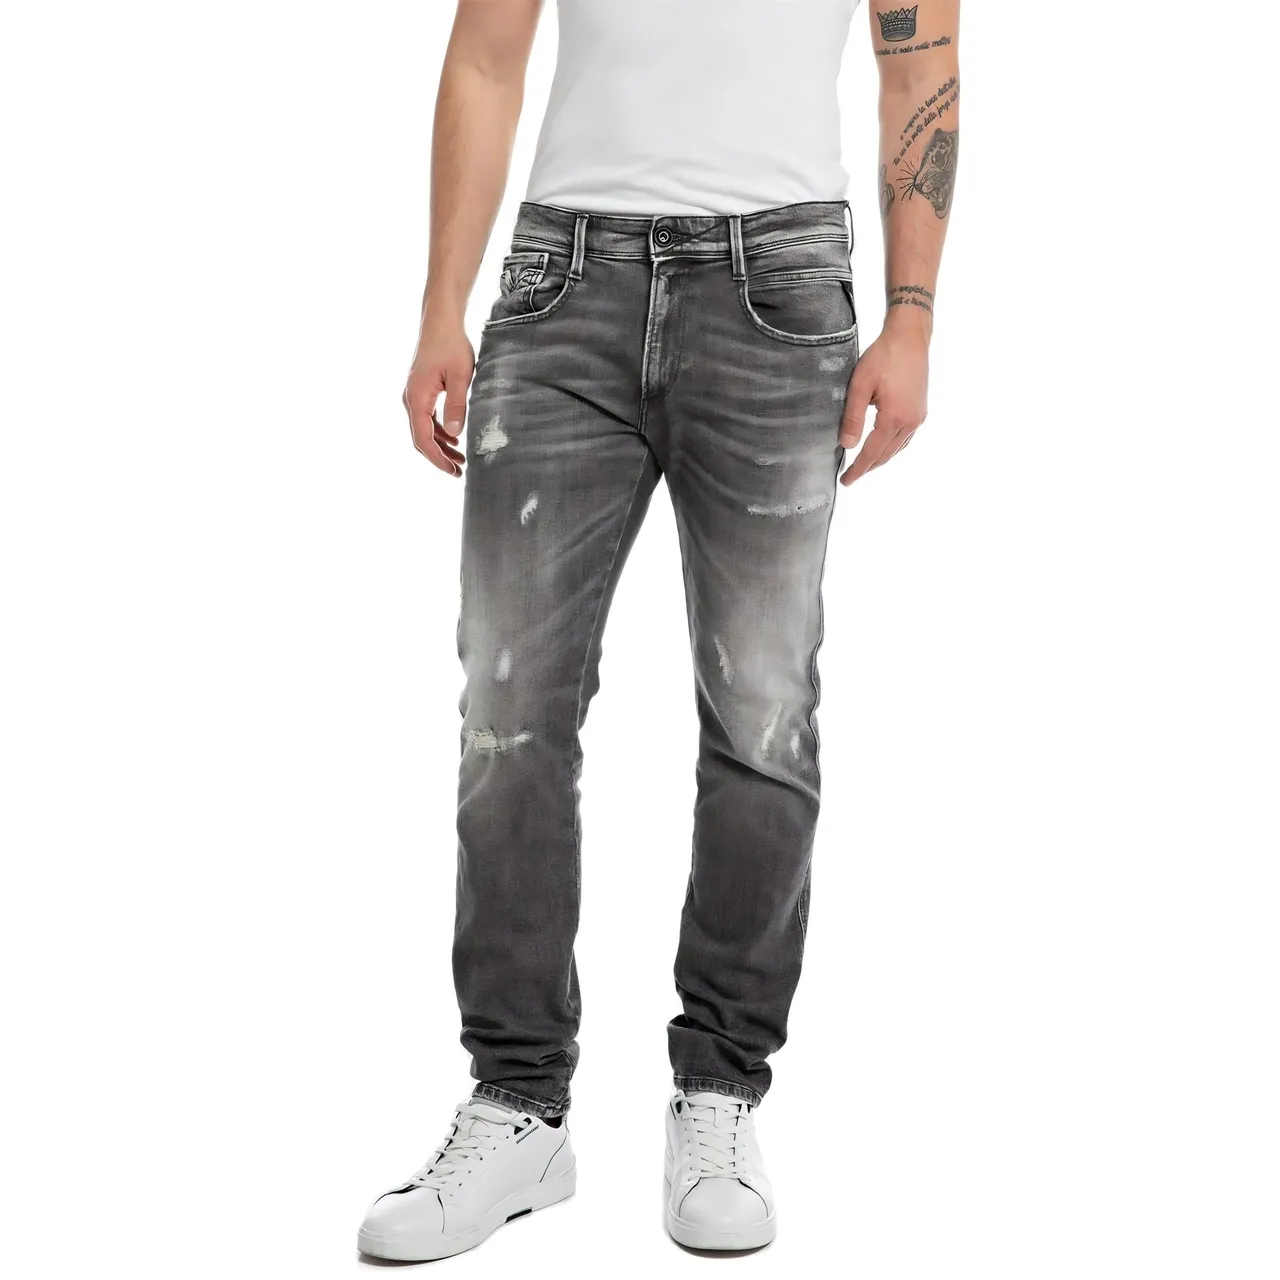 Replay Herren Jeans Anbass Slim-Fit Aged